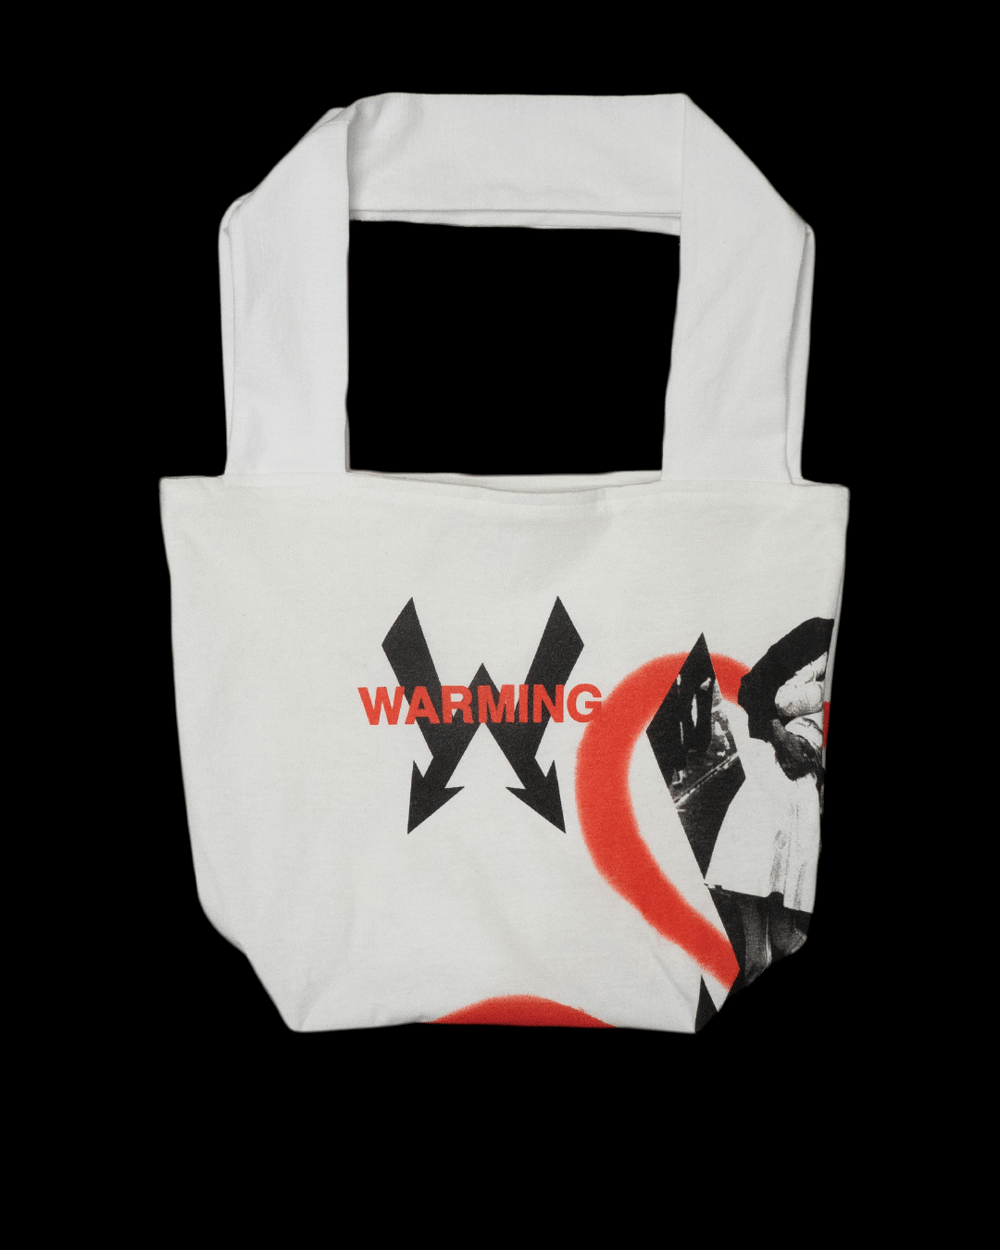 Valentines Day Tote Bag